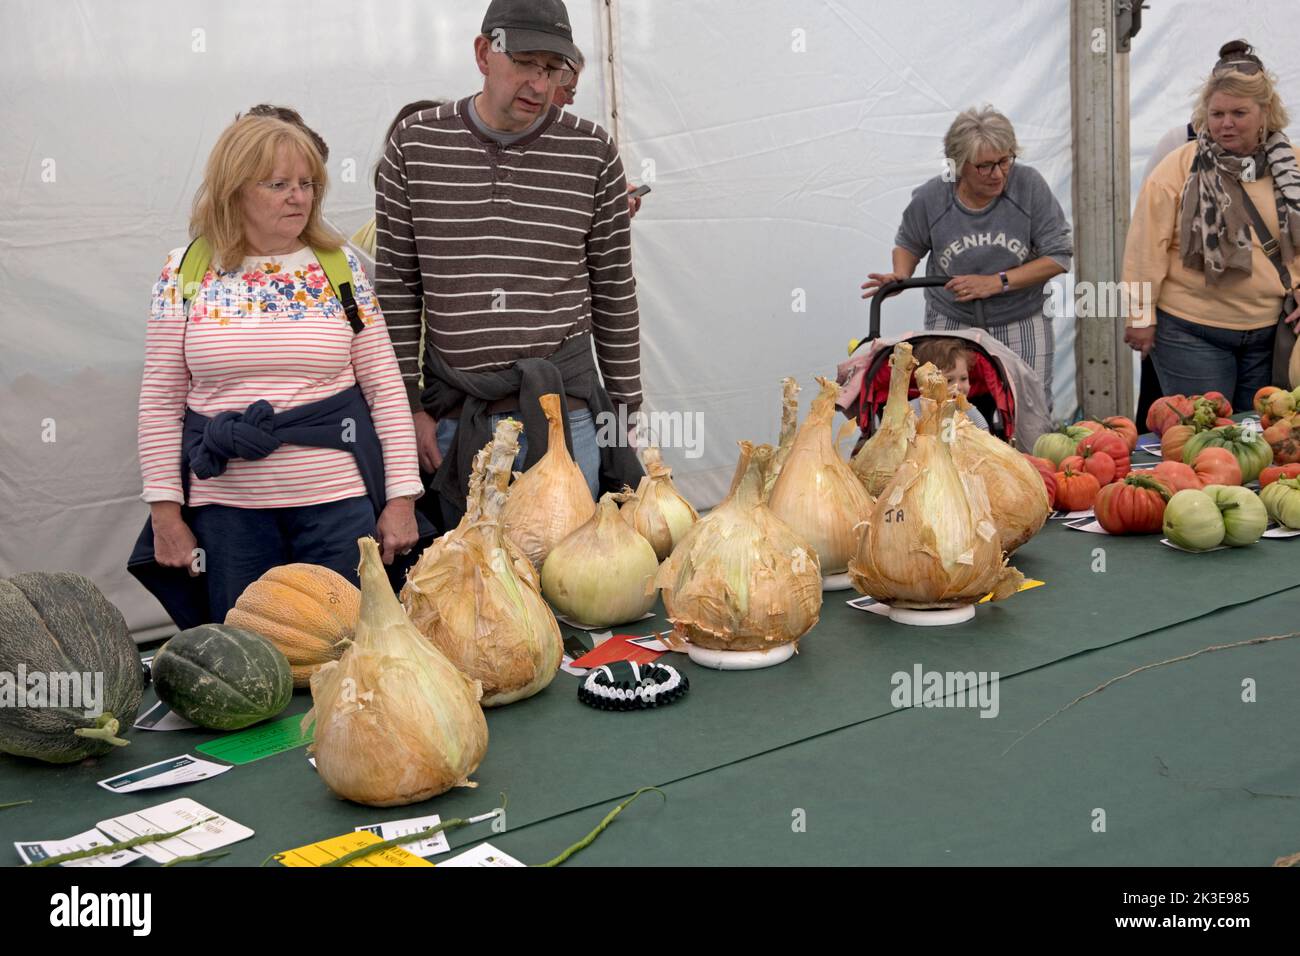 Visitors looking at giant onions some of the giant vegetables at Three Counties Autumn Show  Great Malvern, UK Stock Photo